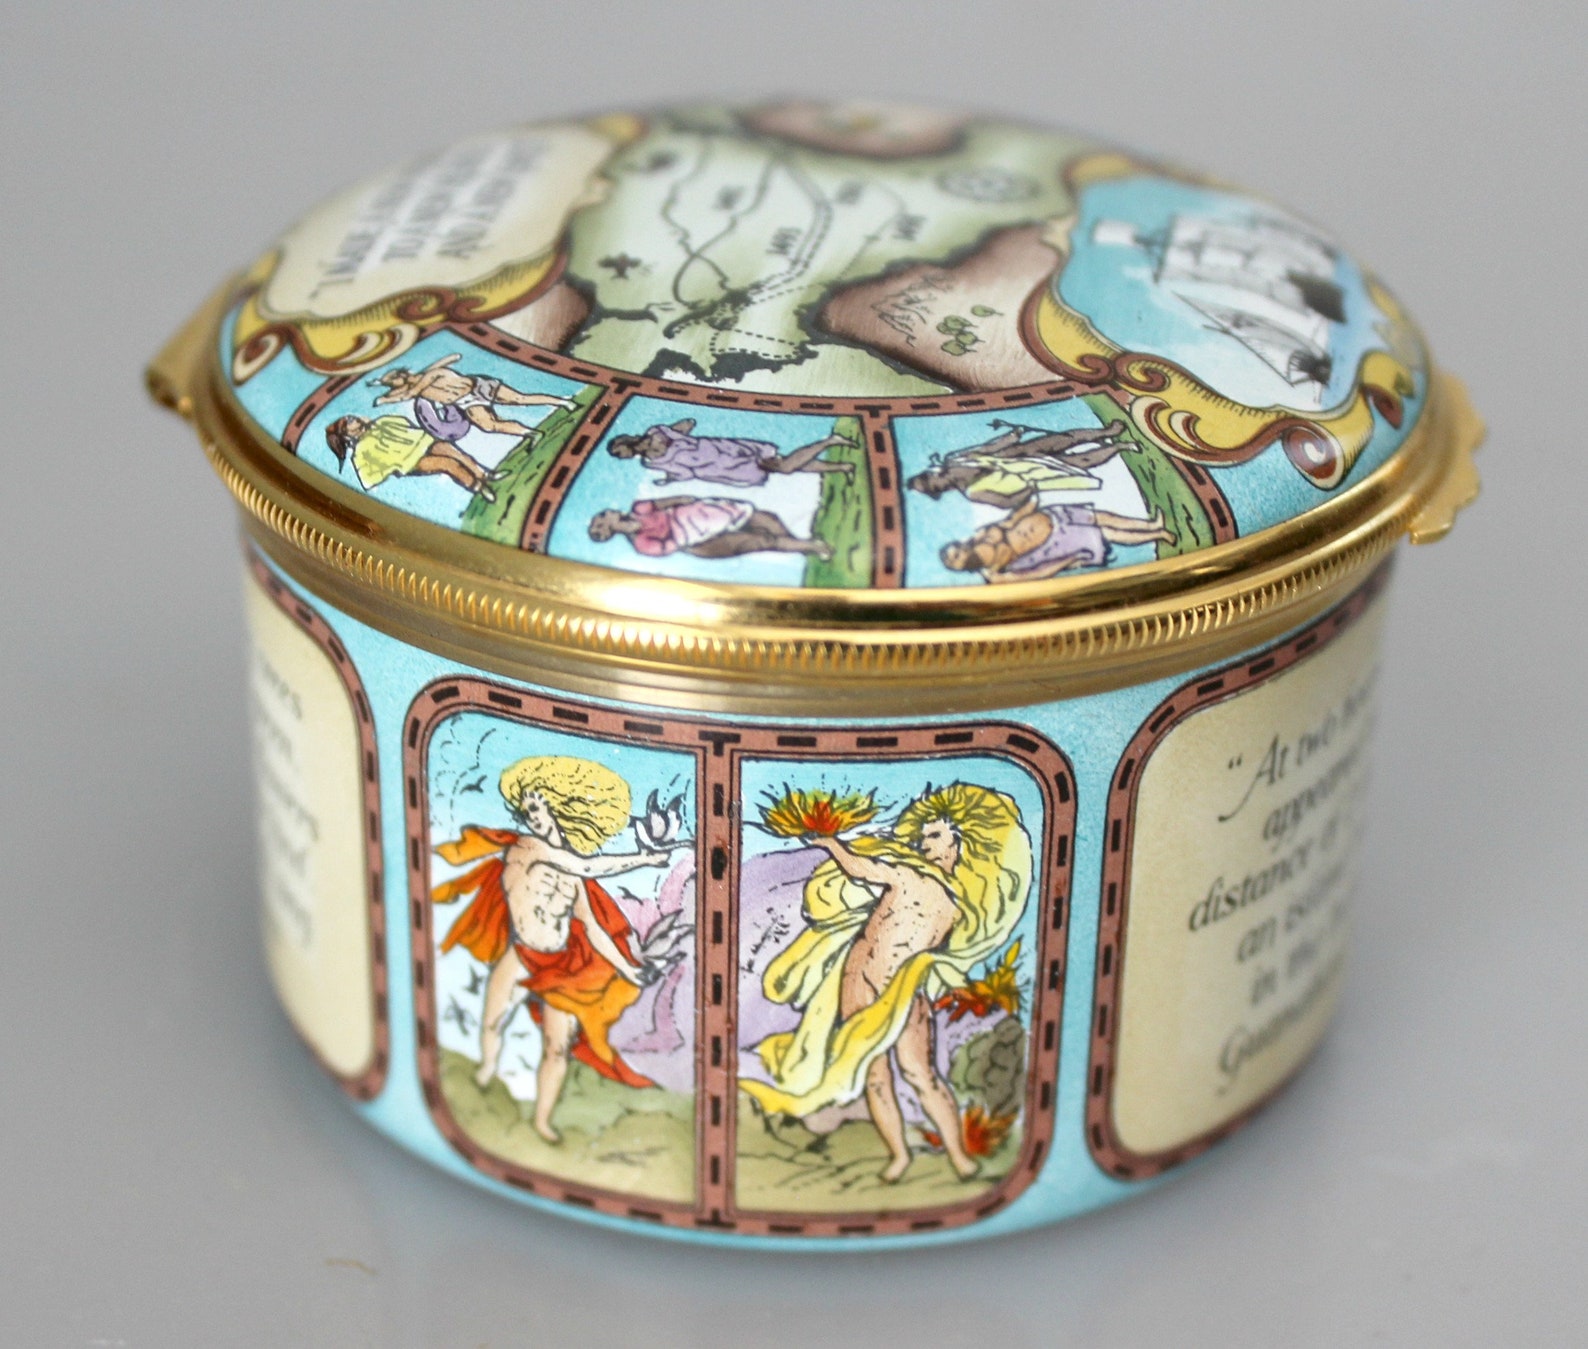 Halcyon Days Enamel Box 500th Anniversary of the Discovery of - Etsy ...